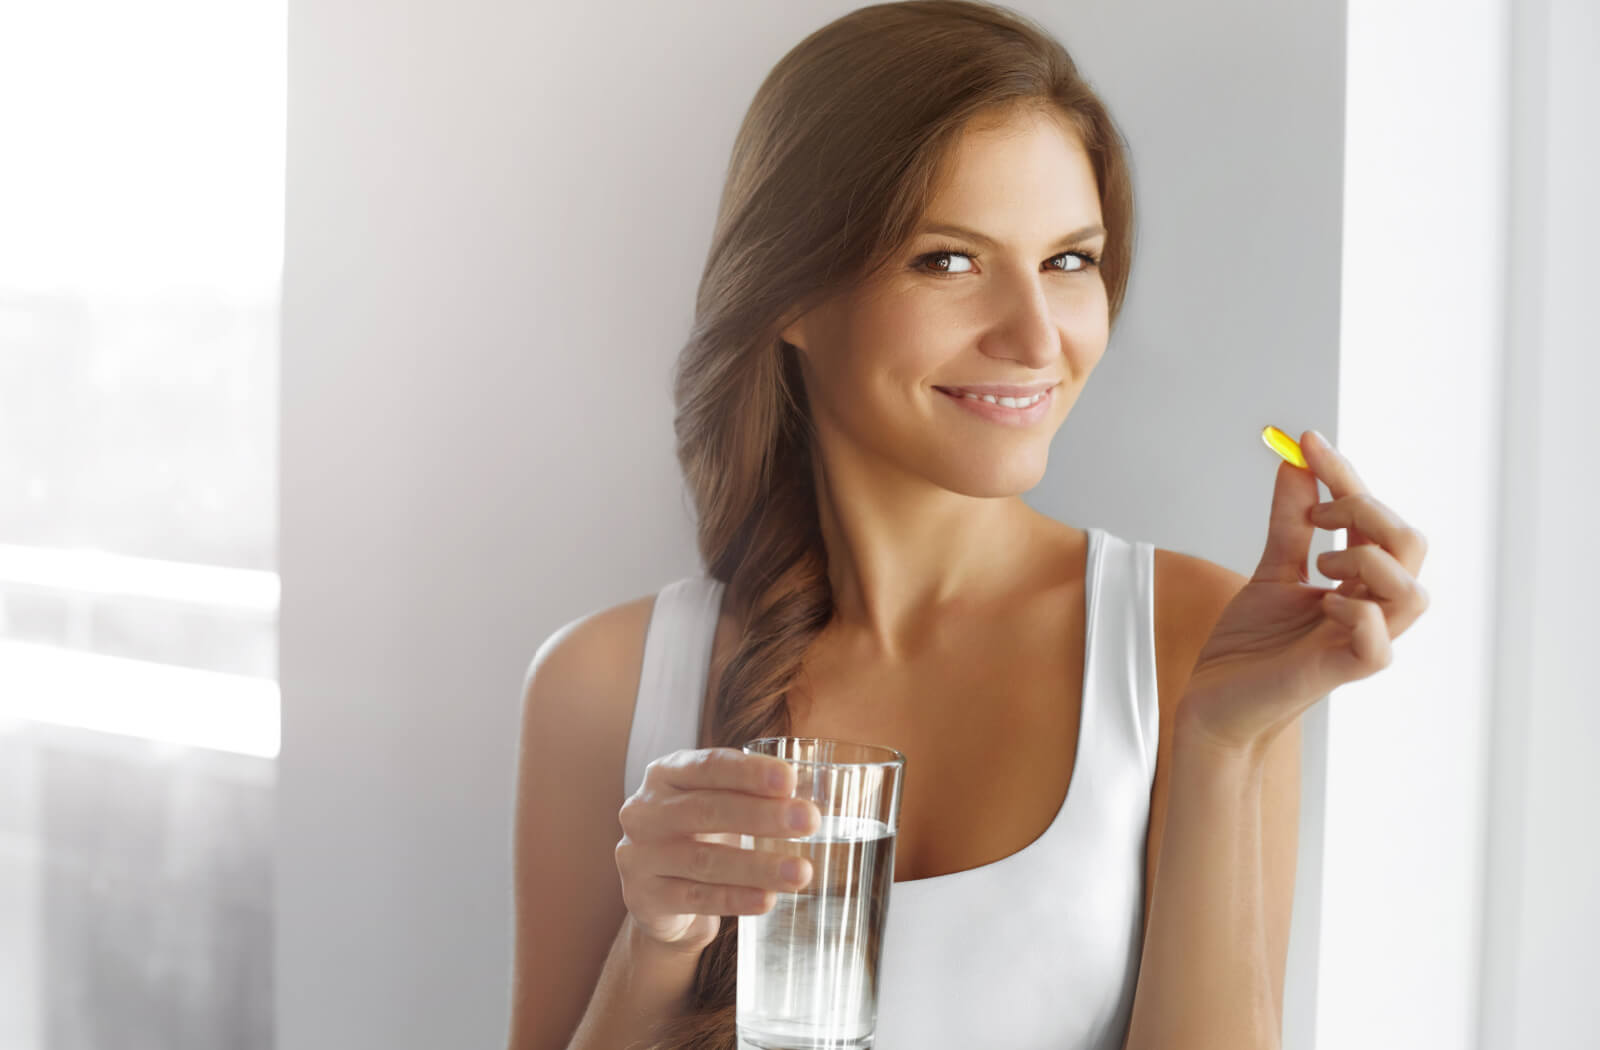 A smiling woman holding a vitamin pill in her left hand and a glass of water in her right hand